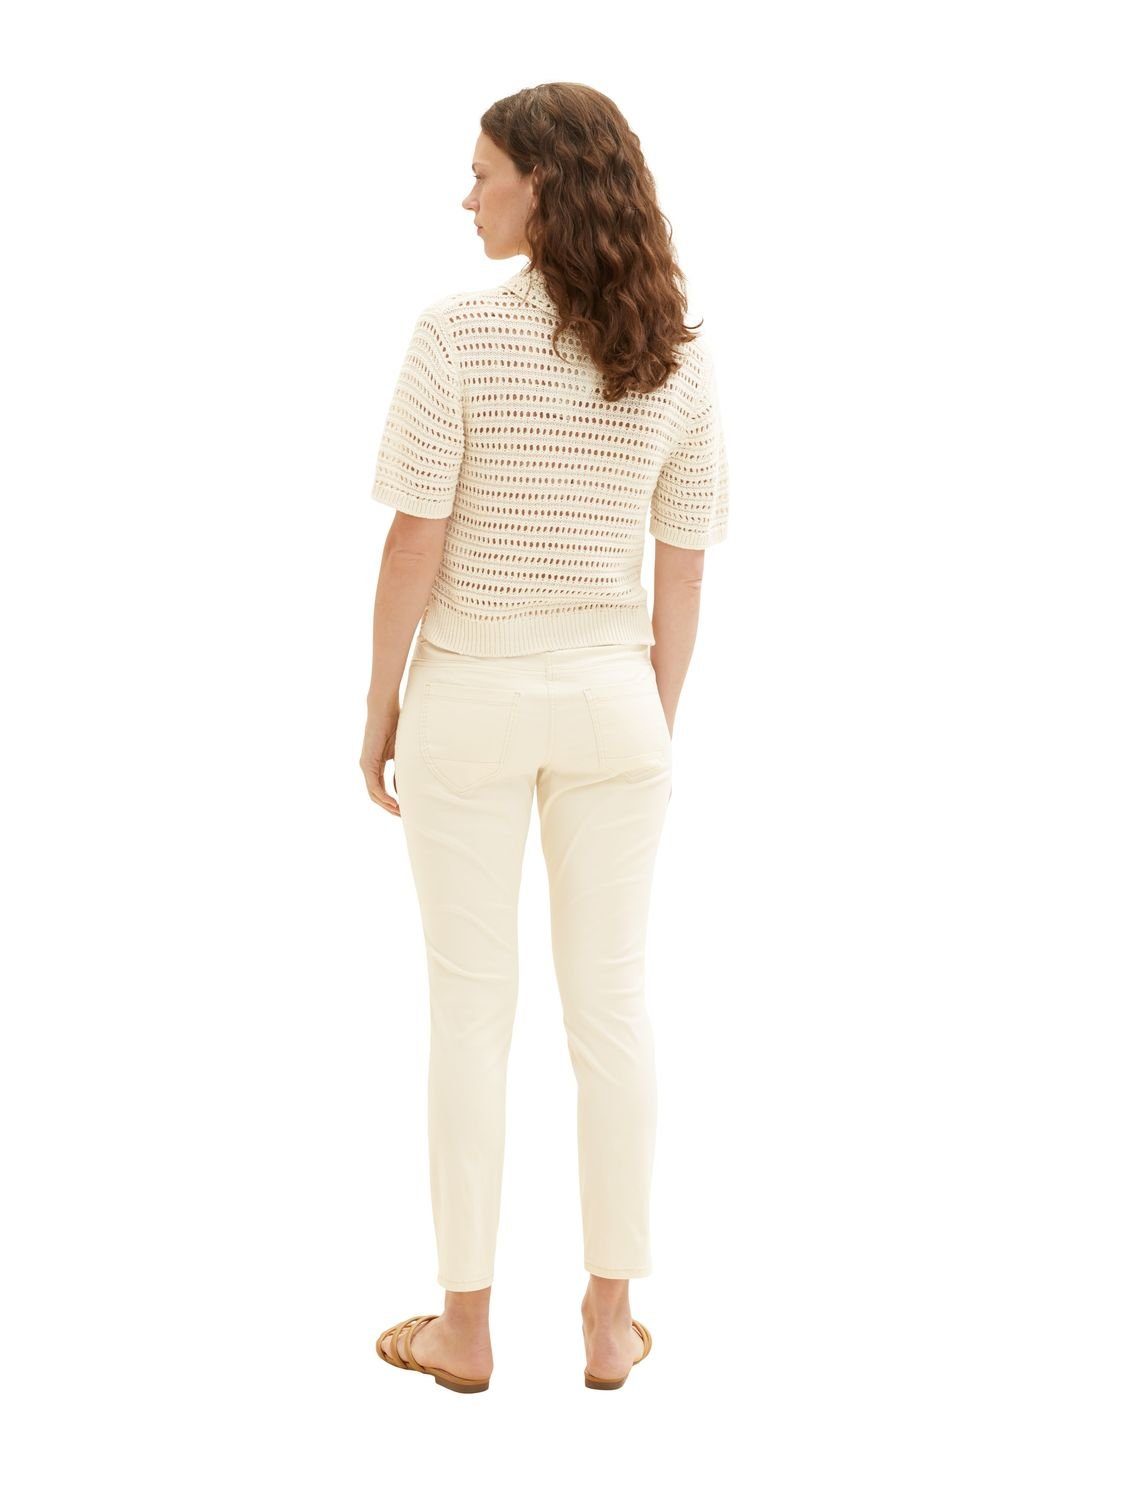 RELAXED 31649 Relax-fit-Jeans TAILOR Stretch TOM Ivory Ecru mit TAPERED